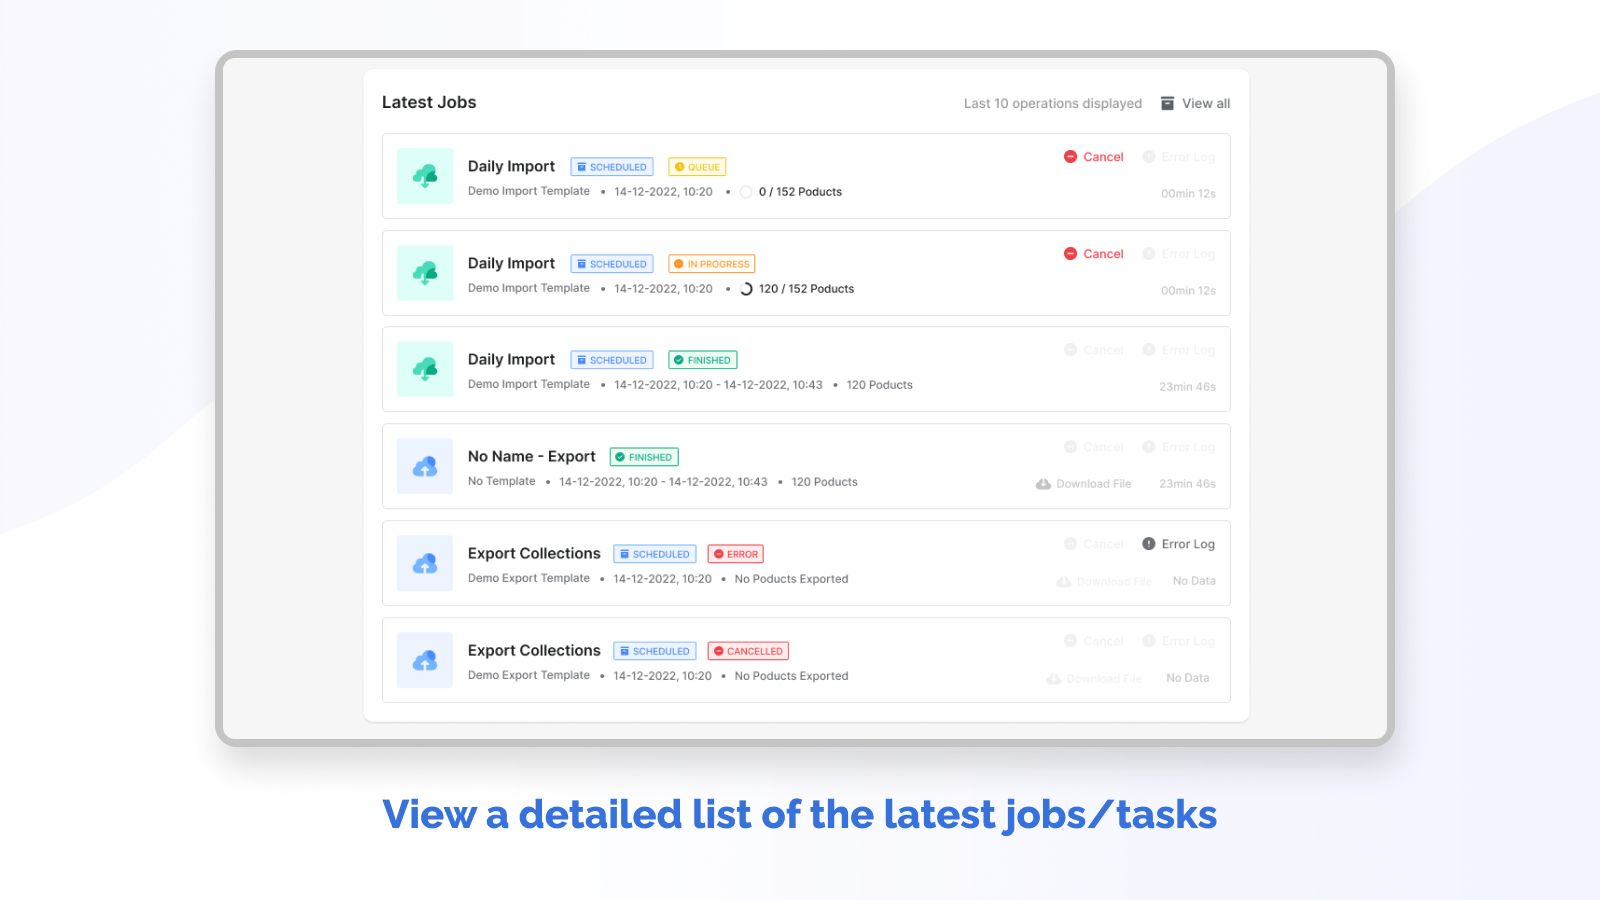 View a detailed list of the latest jobs (tasks)